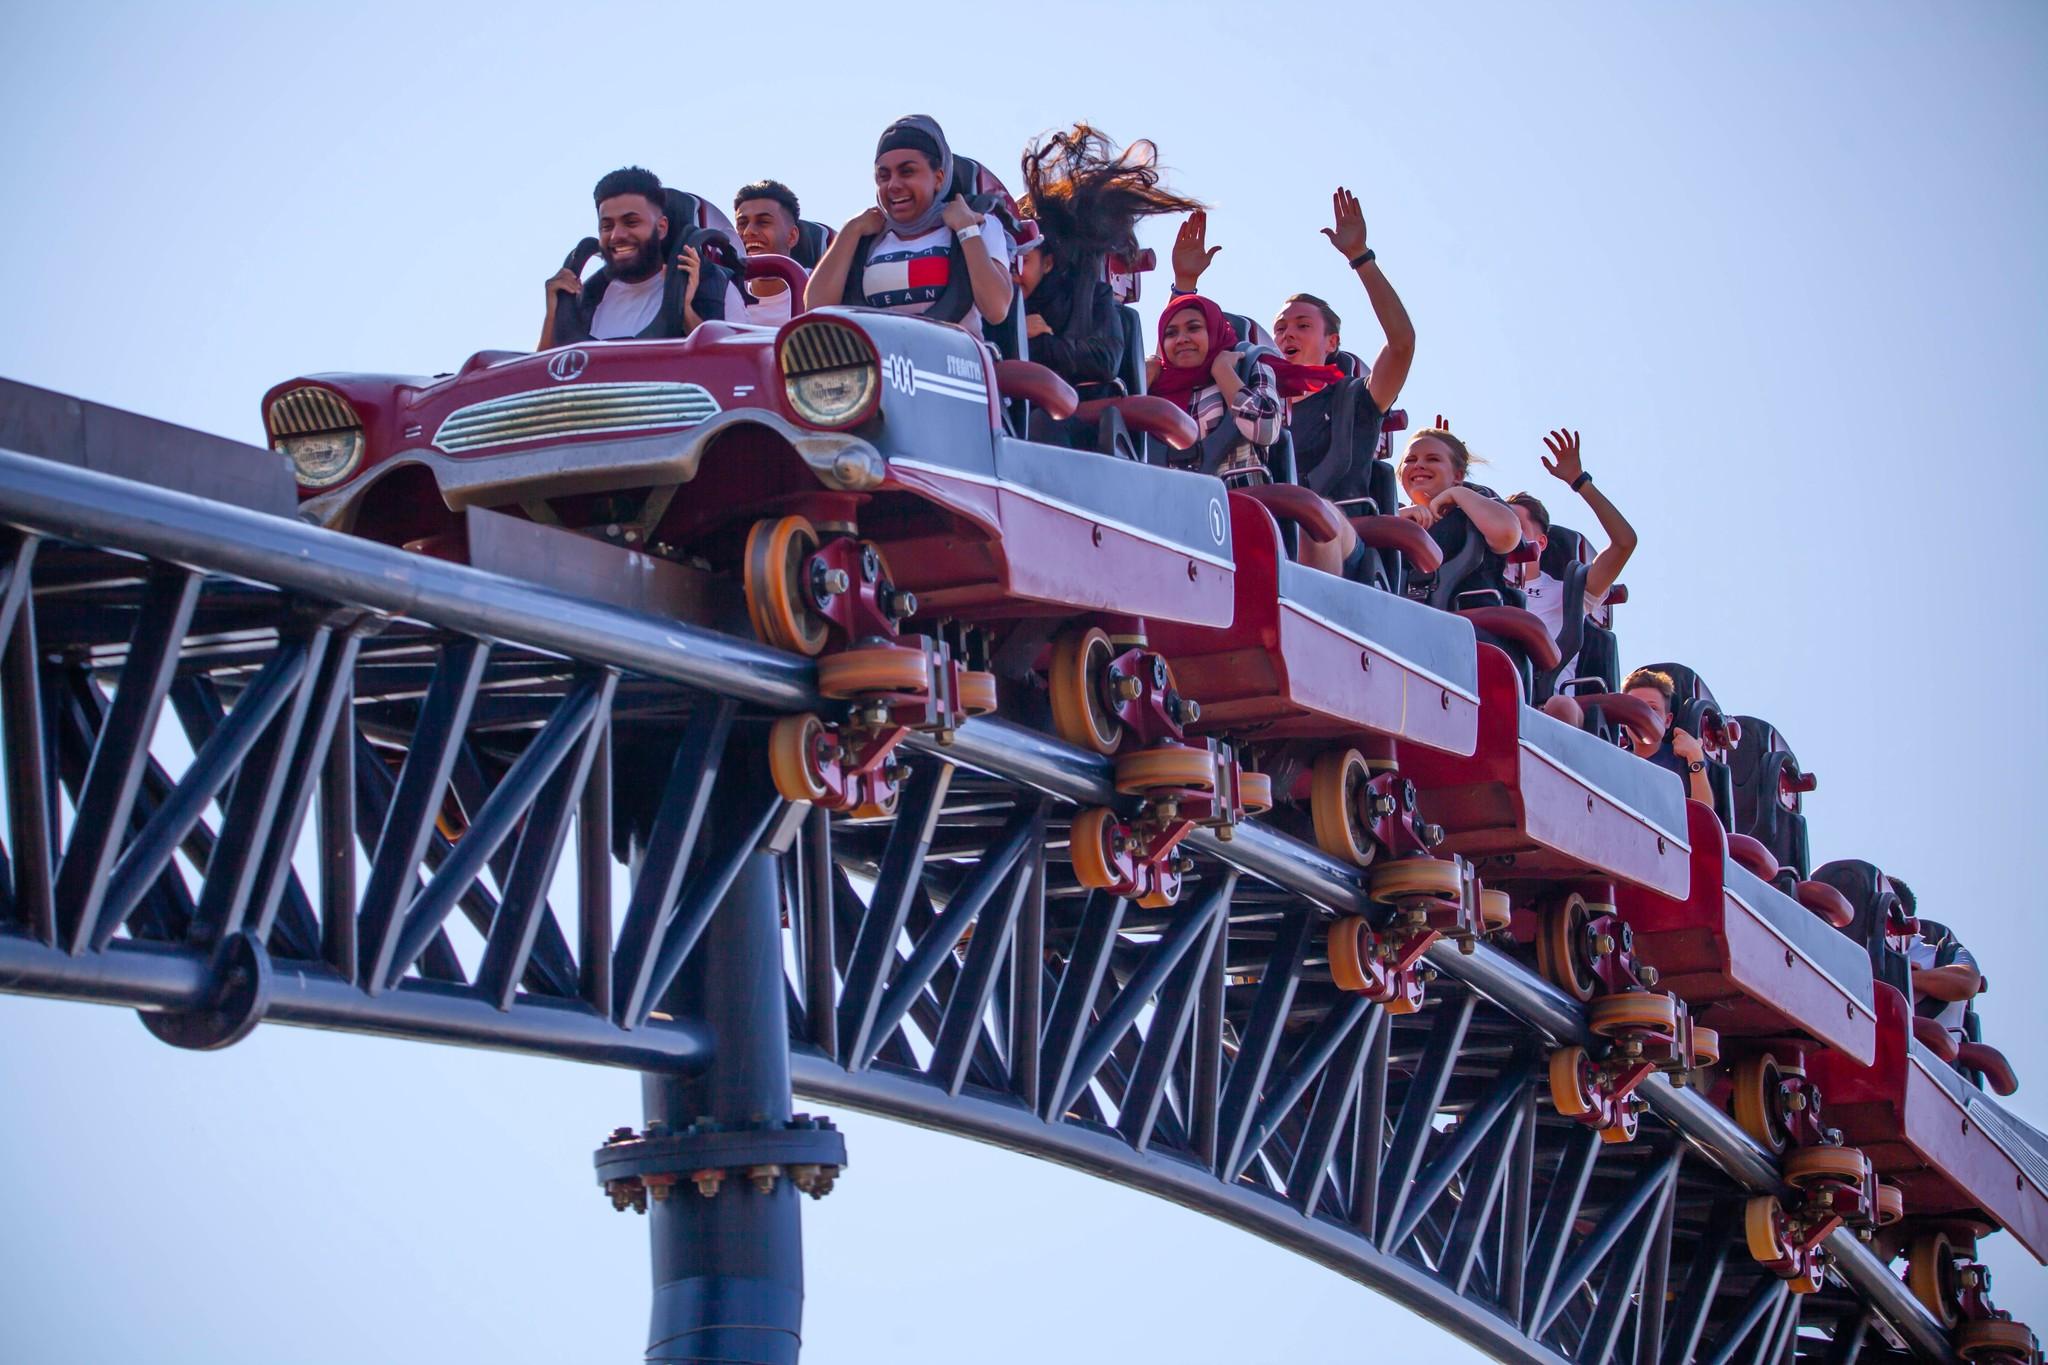 £22 Day Tickets with your Student Discount at Thorpe Park